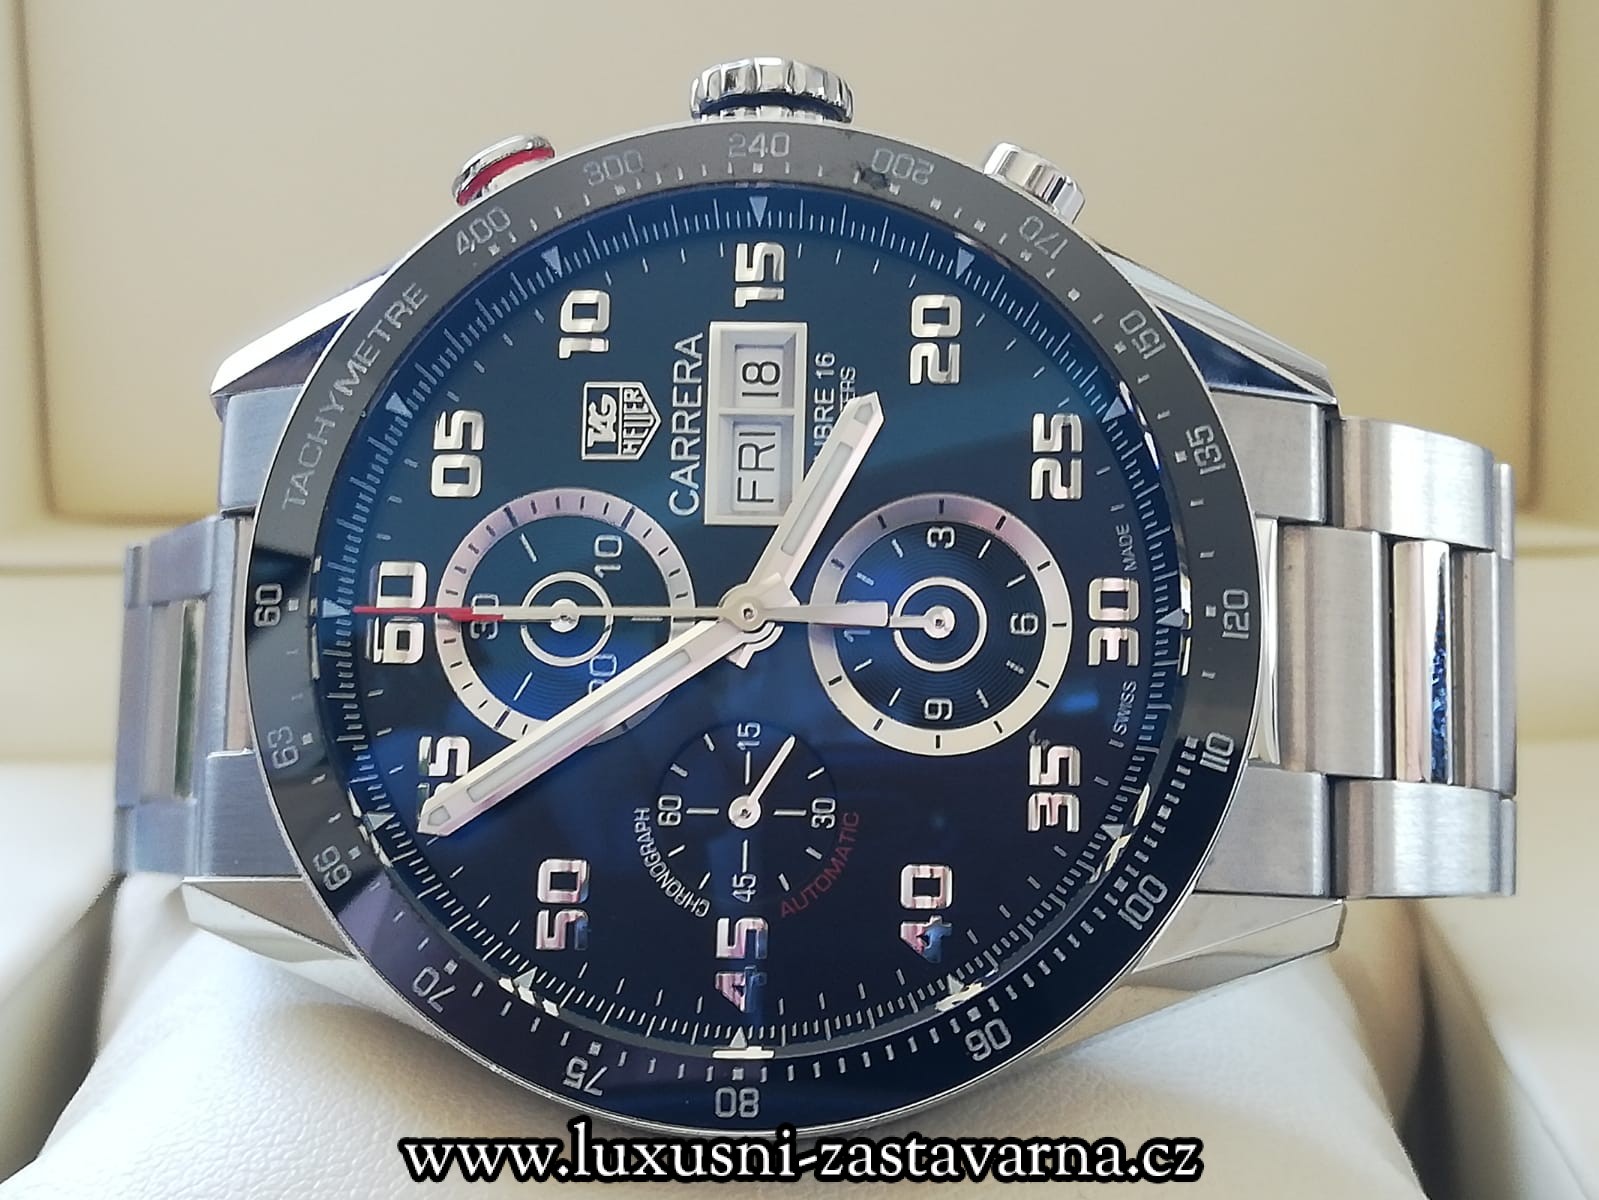 Tag_Heuer_Carrera_Day-Date_43mm_005